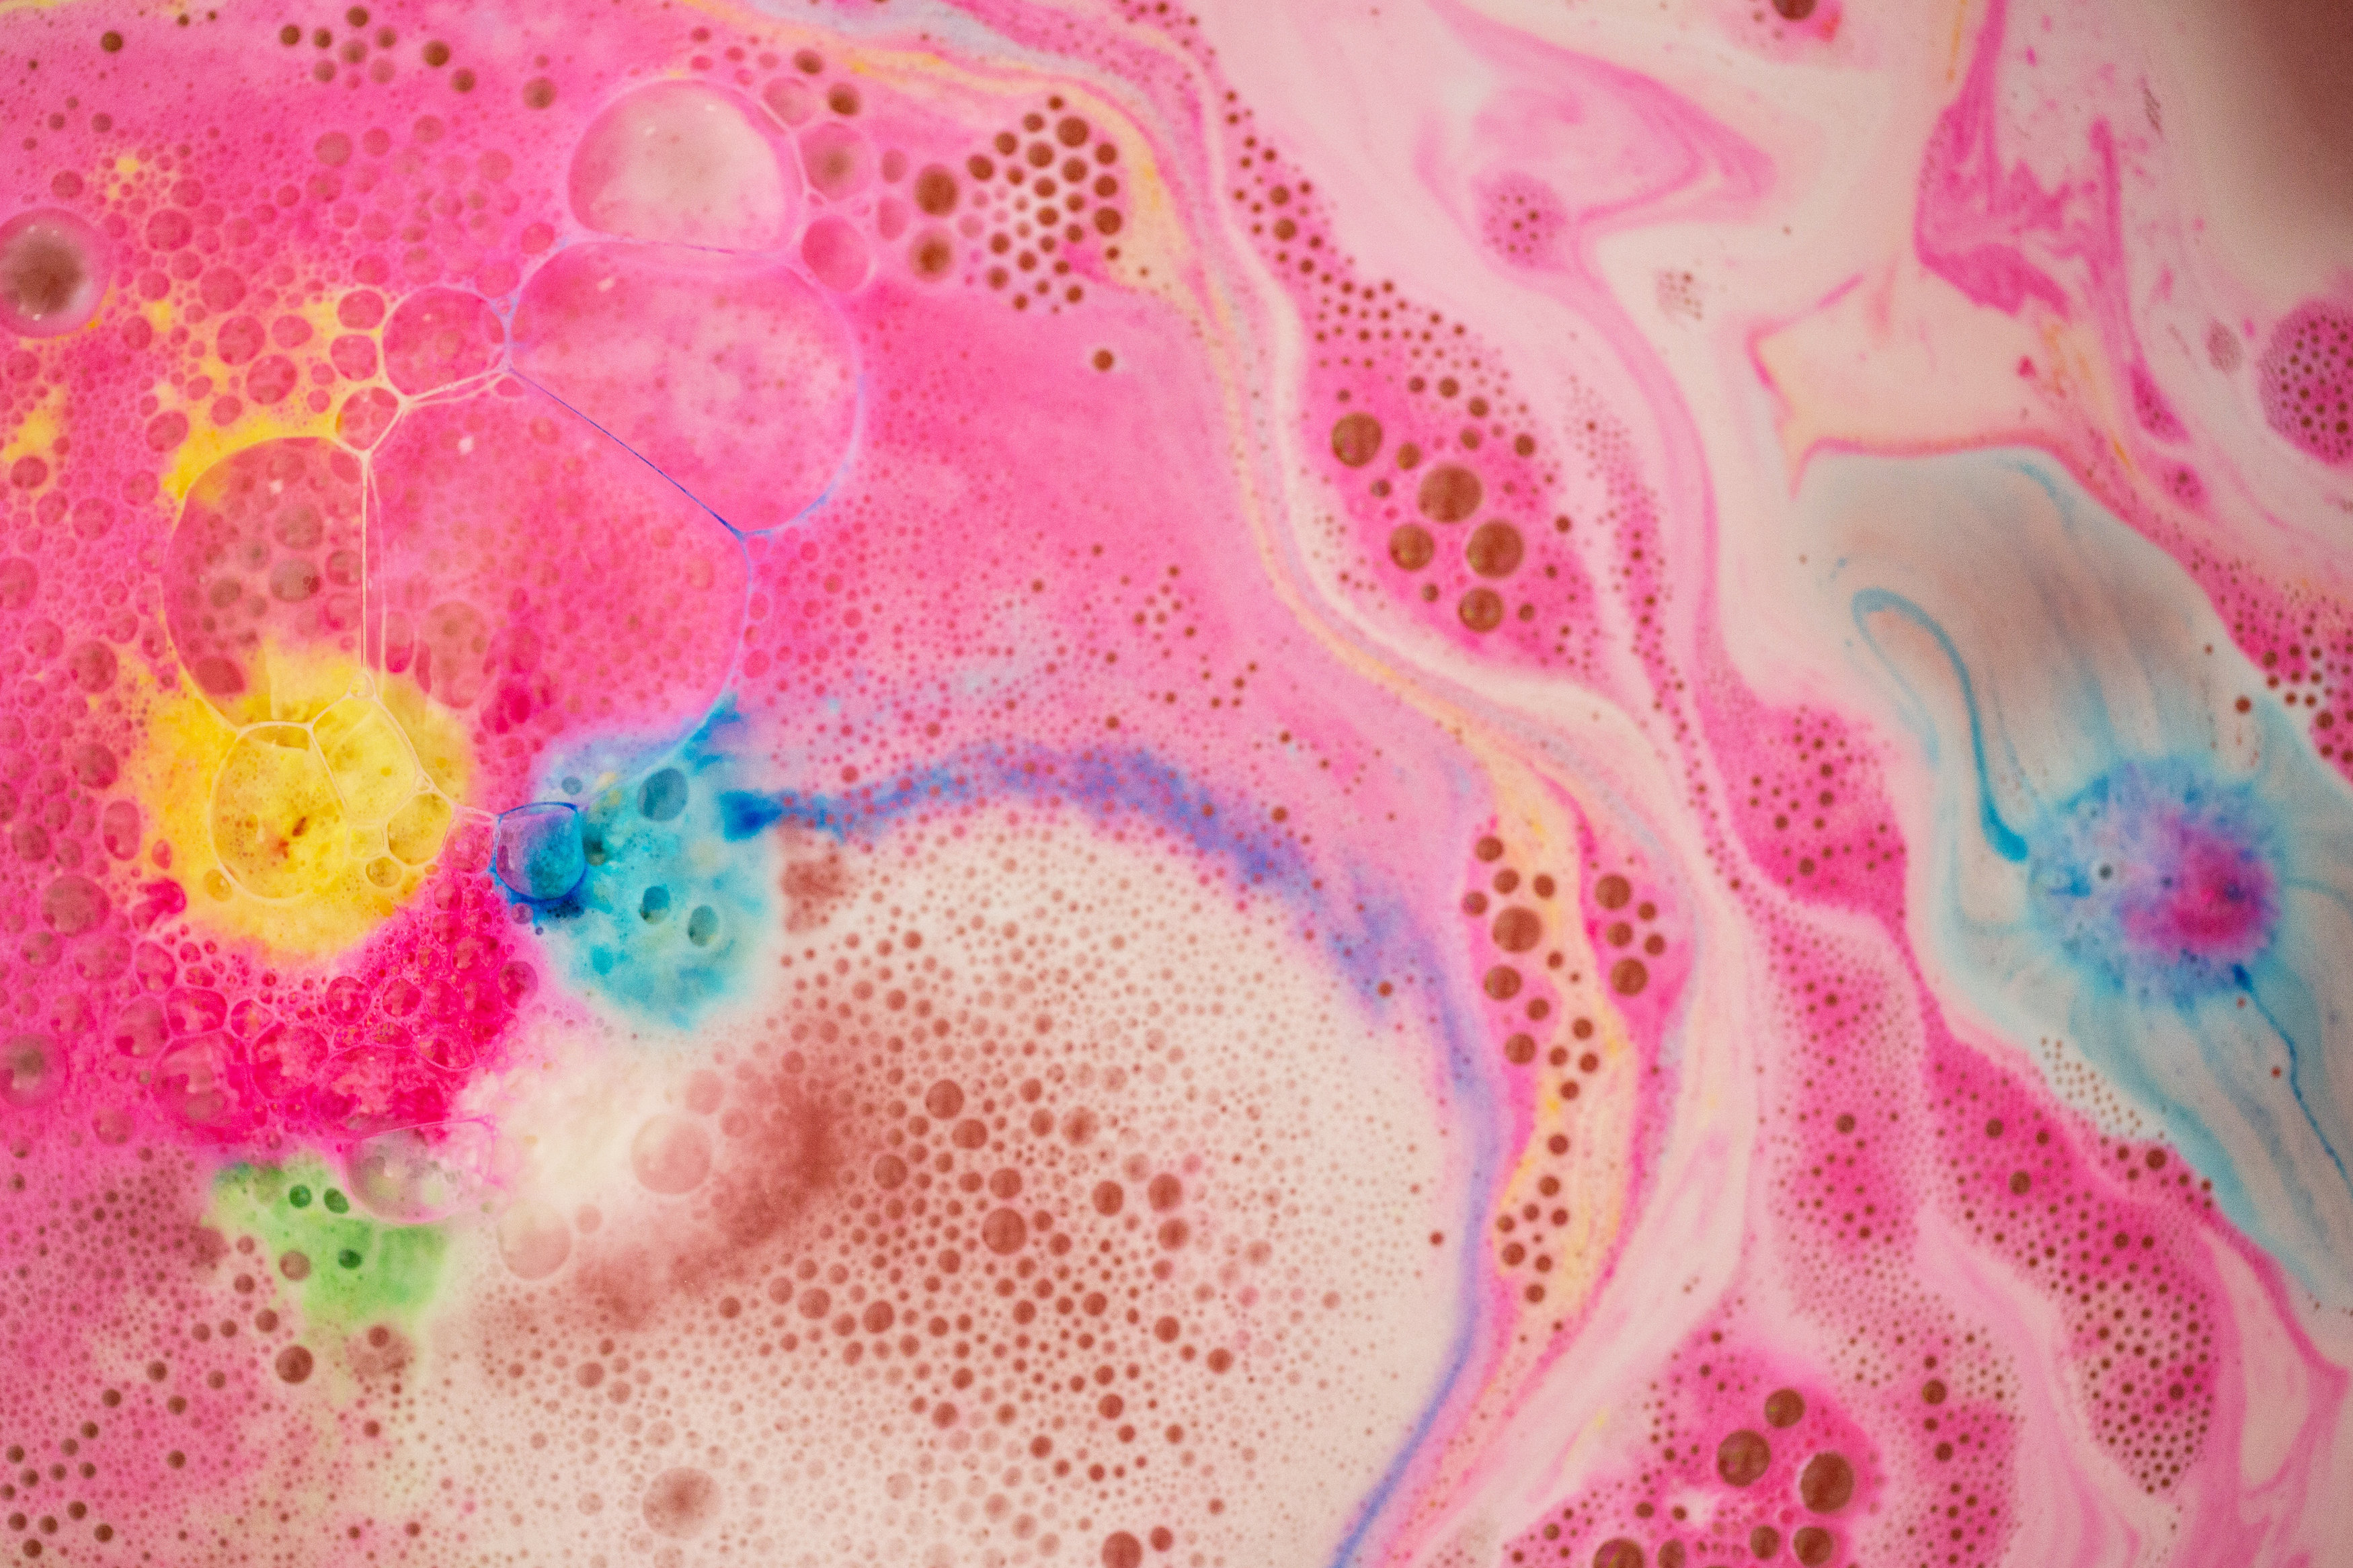 Lush migrates their eCommerce sites to Google Cloud